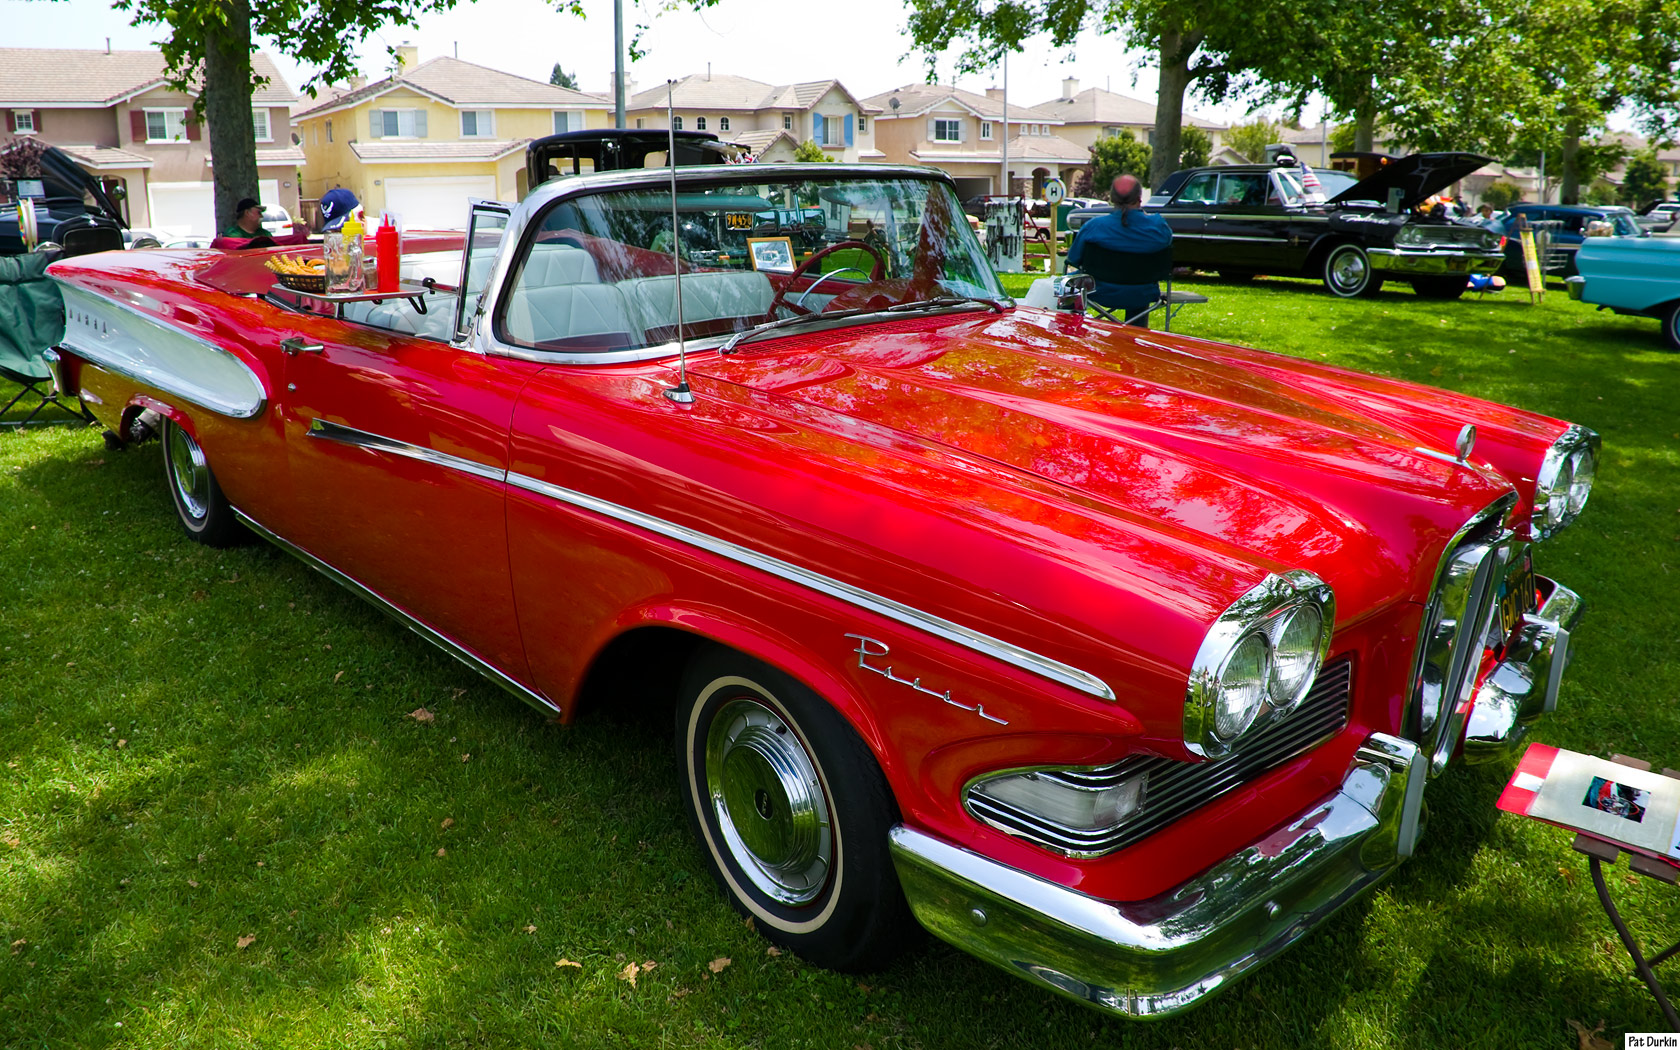 1958 Edsel Pacer Convertible with top down - red & white - fvr ...